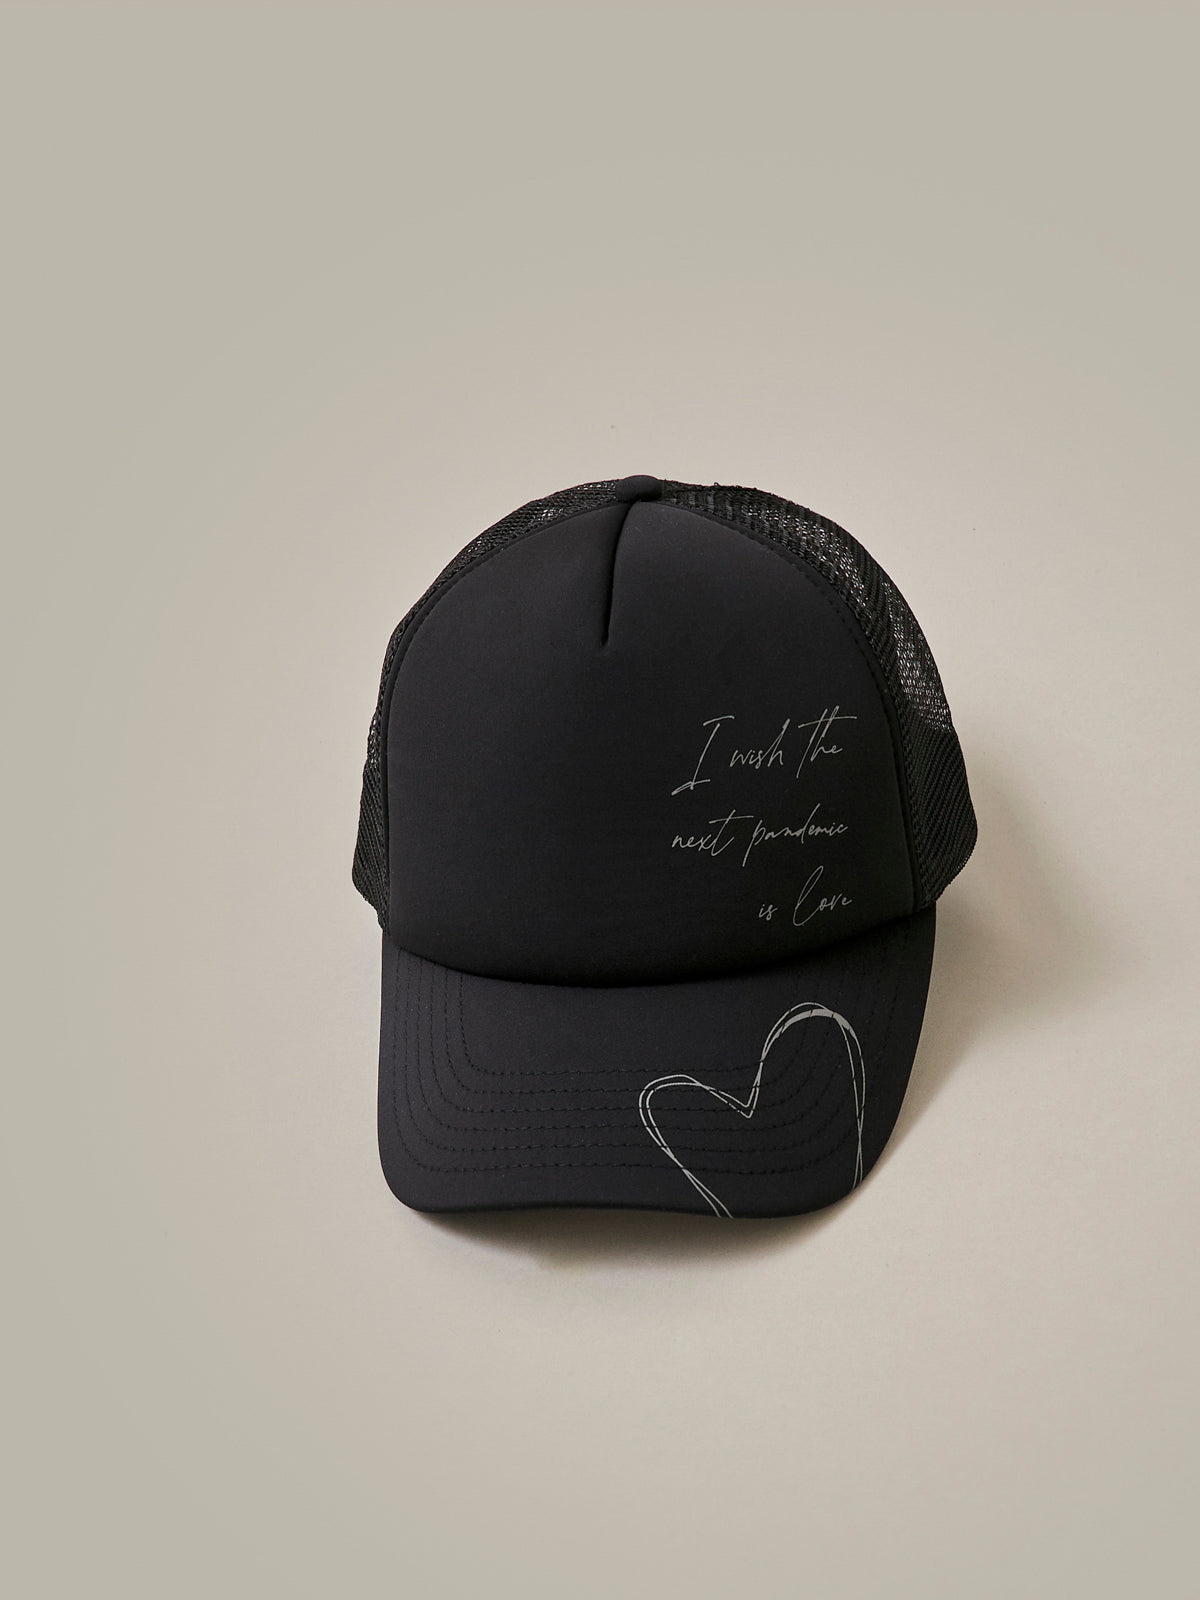 "I Wish The Next Pandemic Is Love" Carbon Black Trucker Cap/ LMTD edition